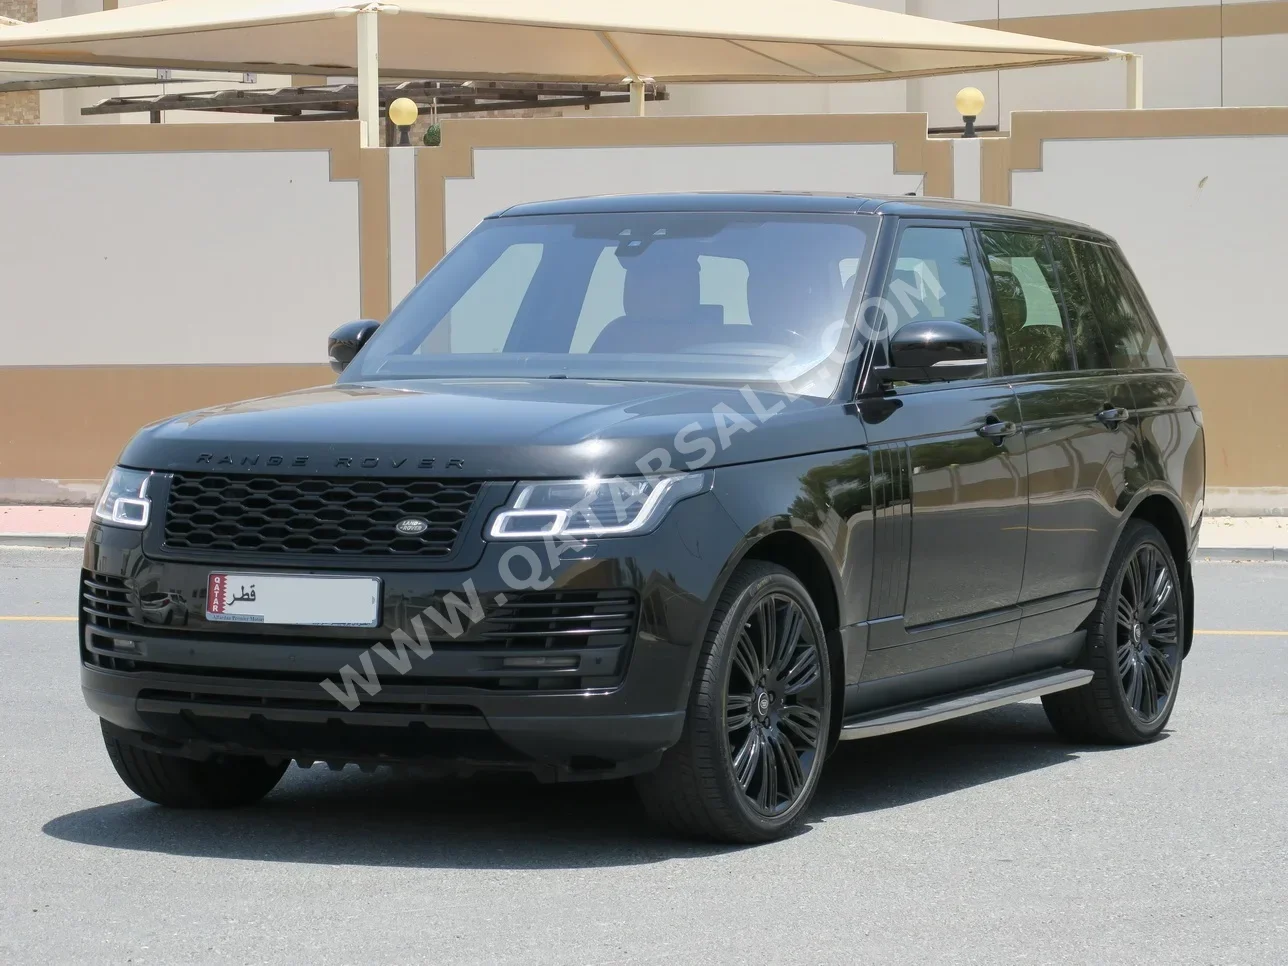 Land Rover  Range Rover  Vogue SE Super charged  2020  Automatic  112,000 Km  8 Cylinder  Four Wheel Drive (4WD)  SUV  Black  With Warranty